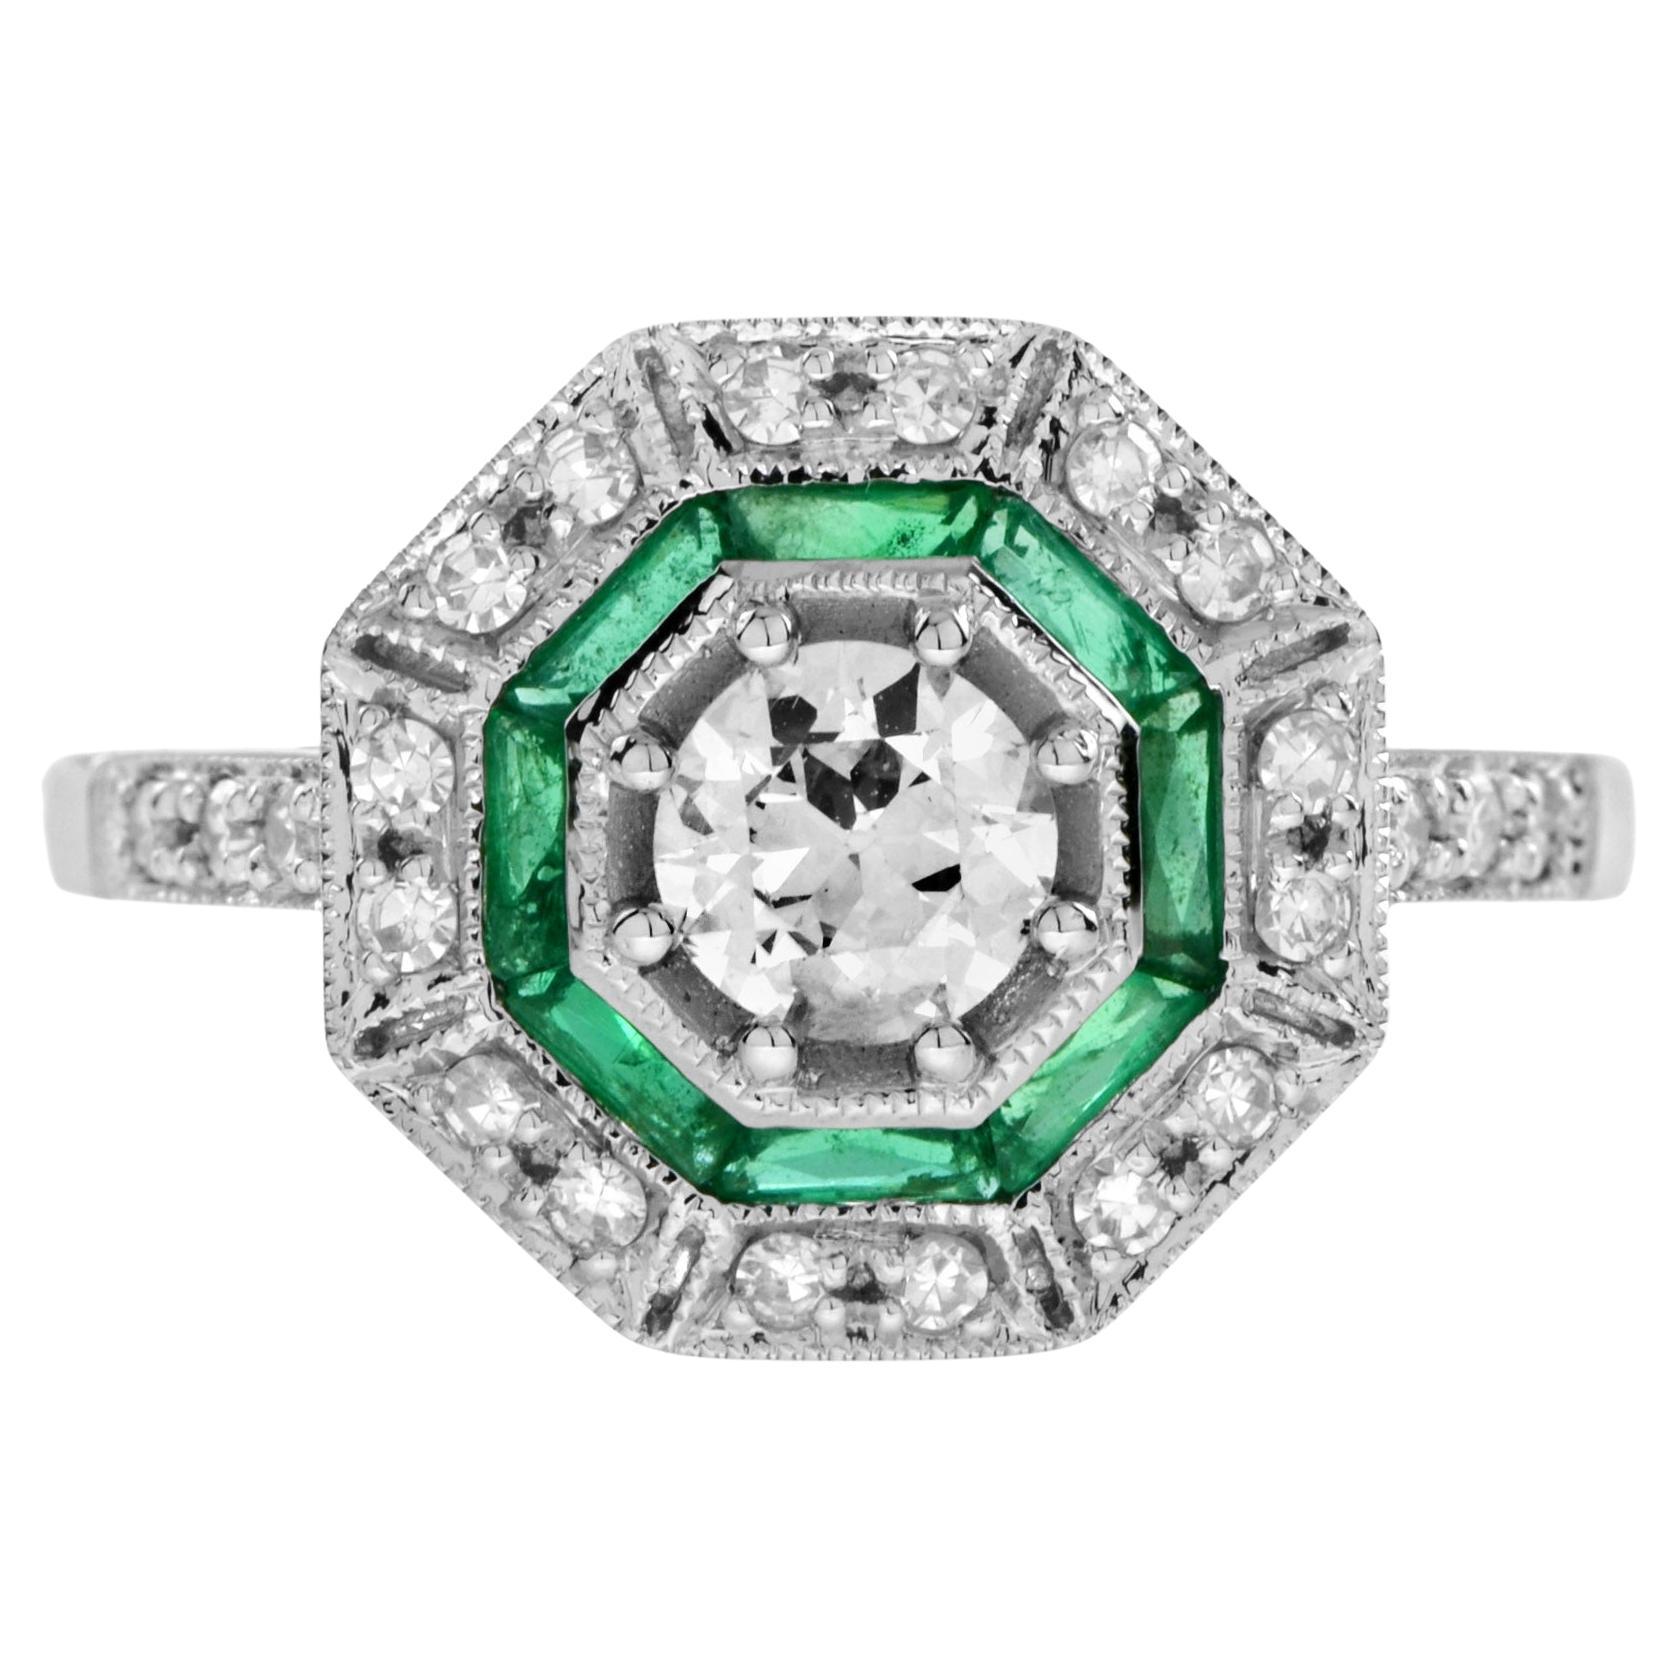 Diamond and Emerald Octagonal Shape Ring in 18k White Gold